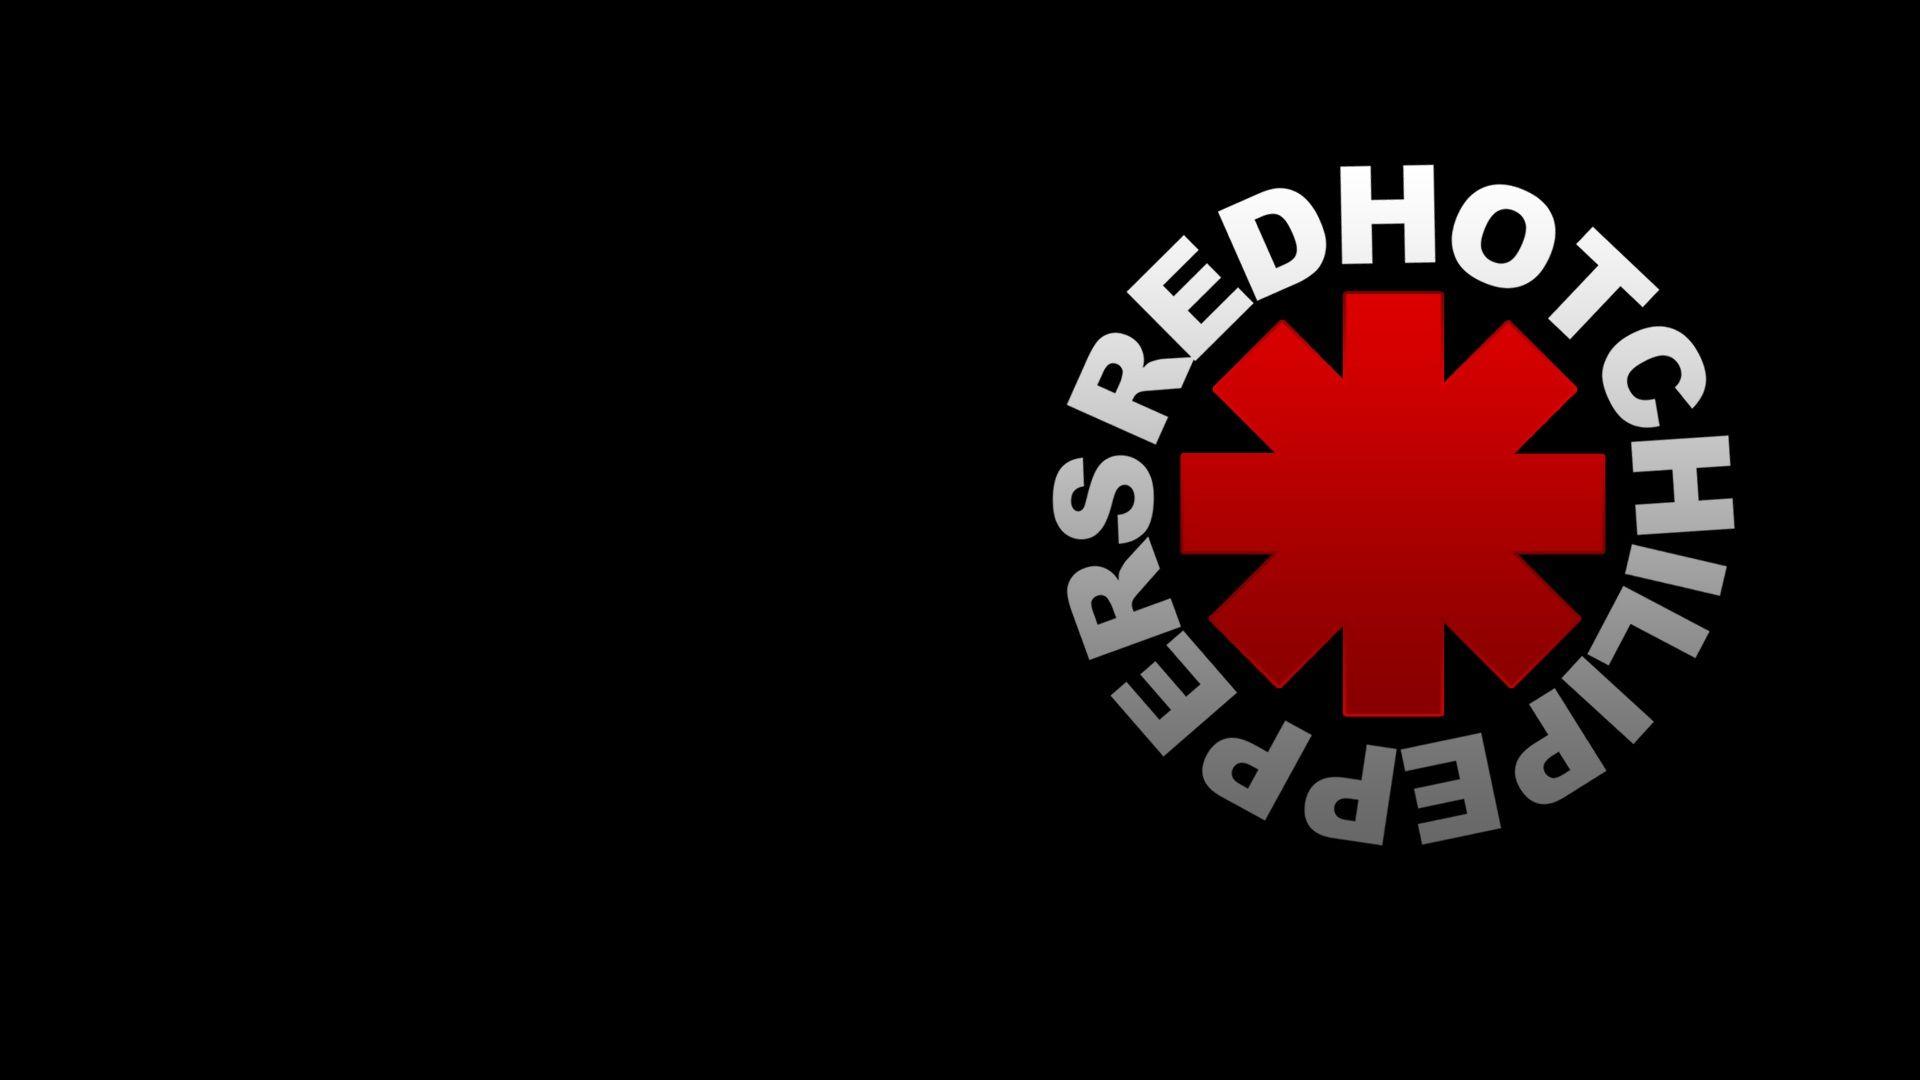 Red Hot Chili Peppers Wallpapers - Wallpaper Cave